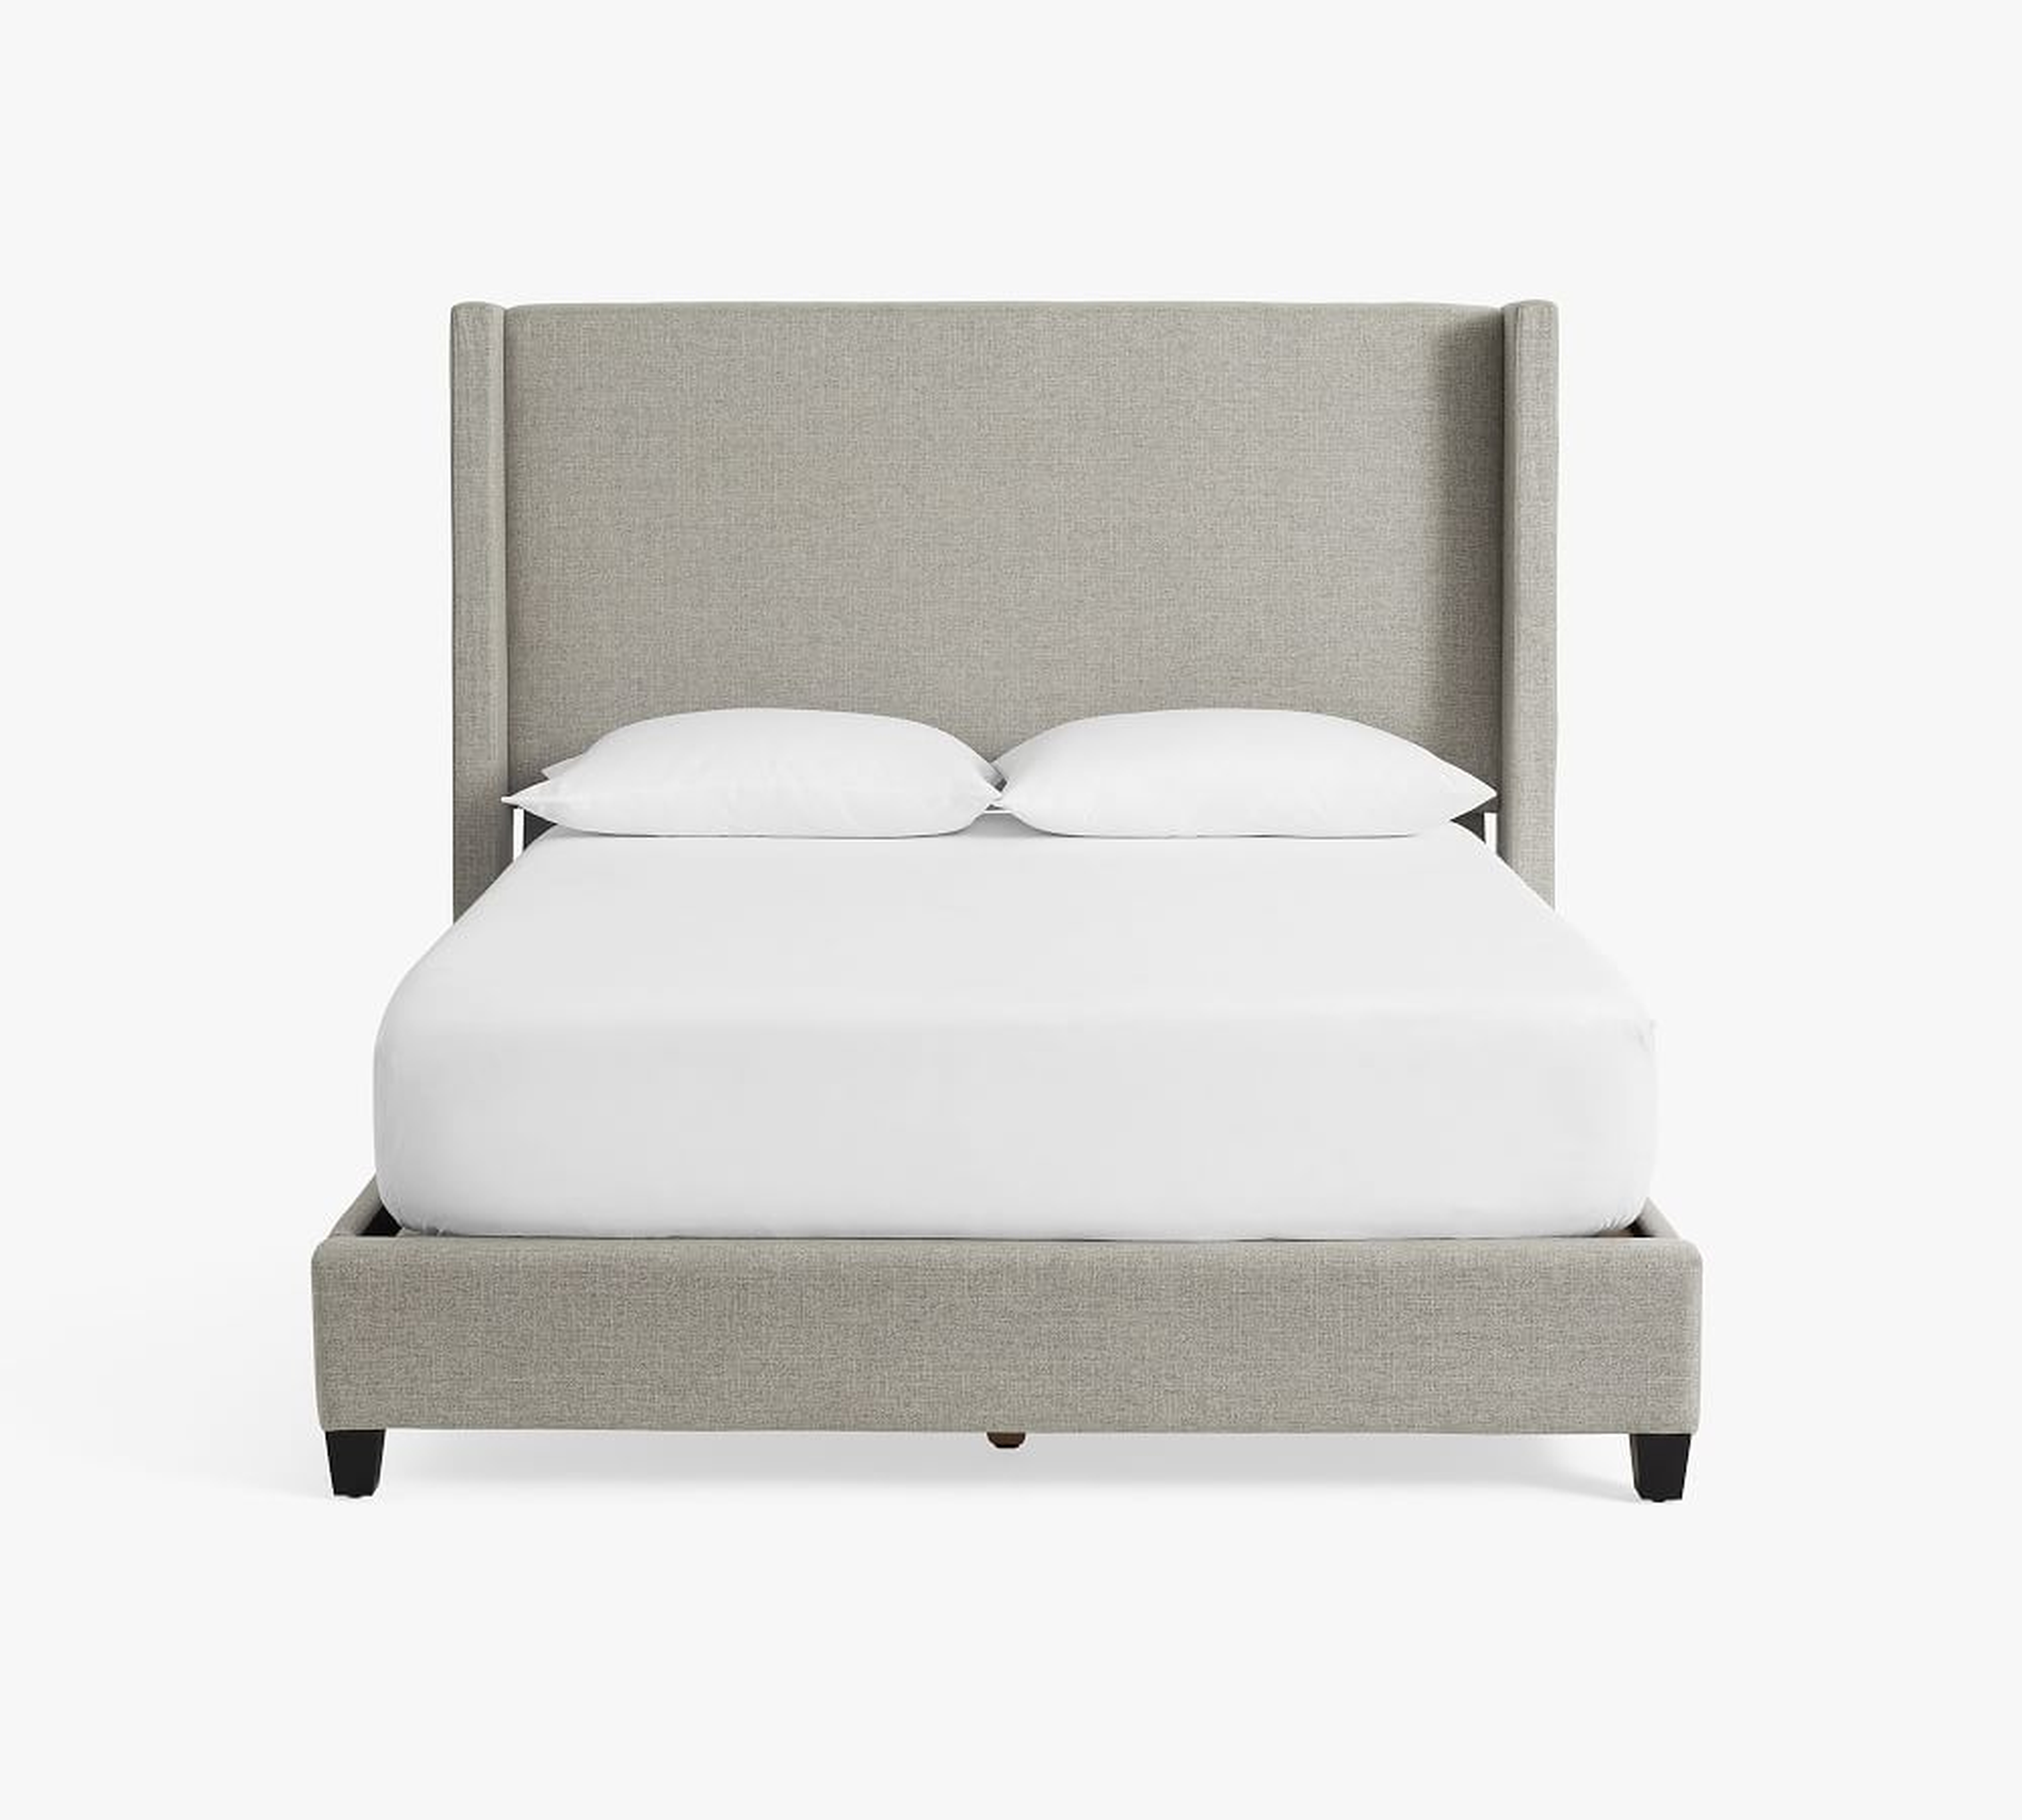 Elliot Non-Tufted Upholstered Bed, King, Tall Headboard 54.5"h, Performance Heathered Basketweave Platinum - Pottery Barn